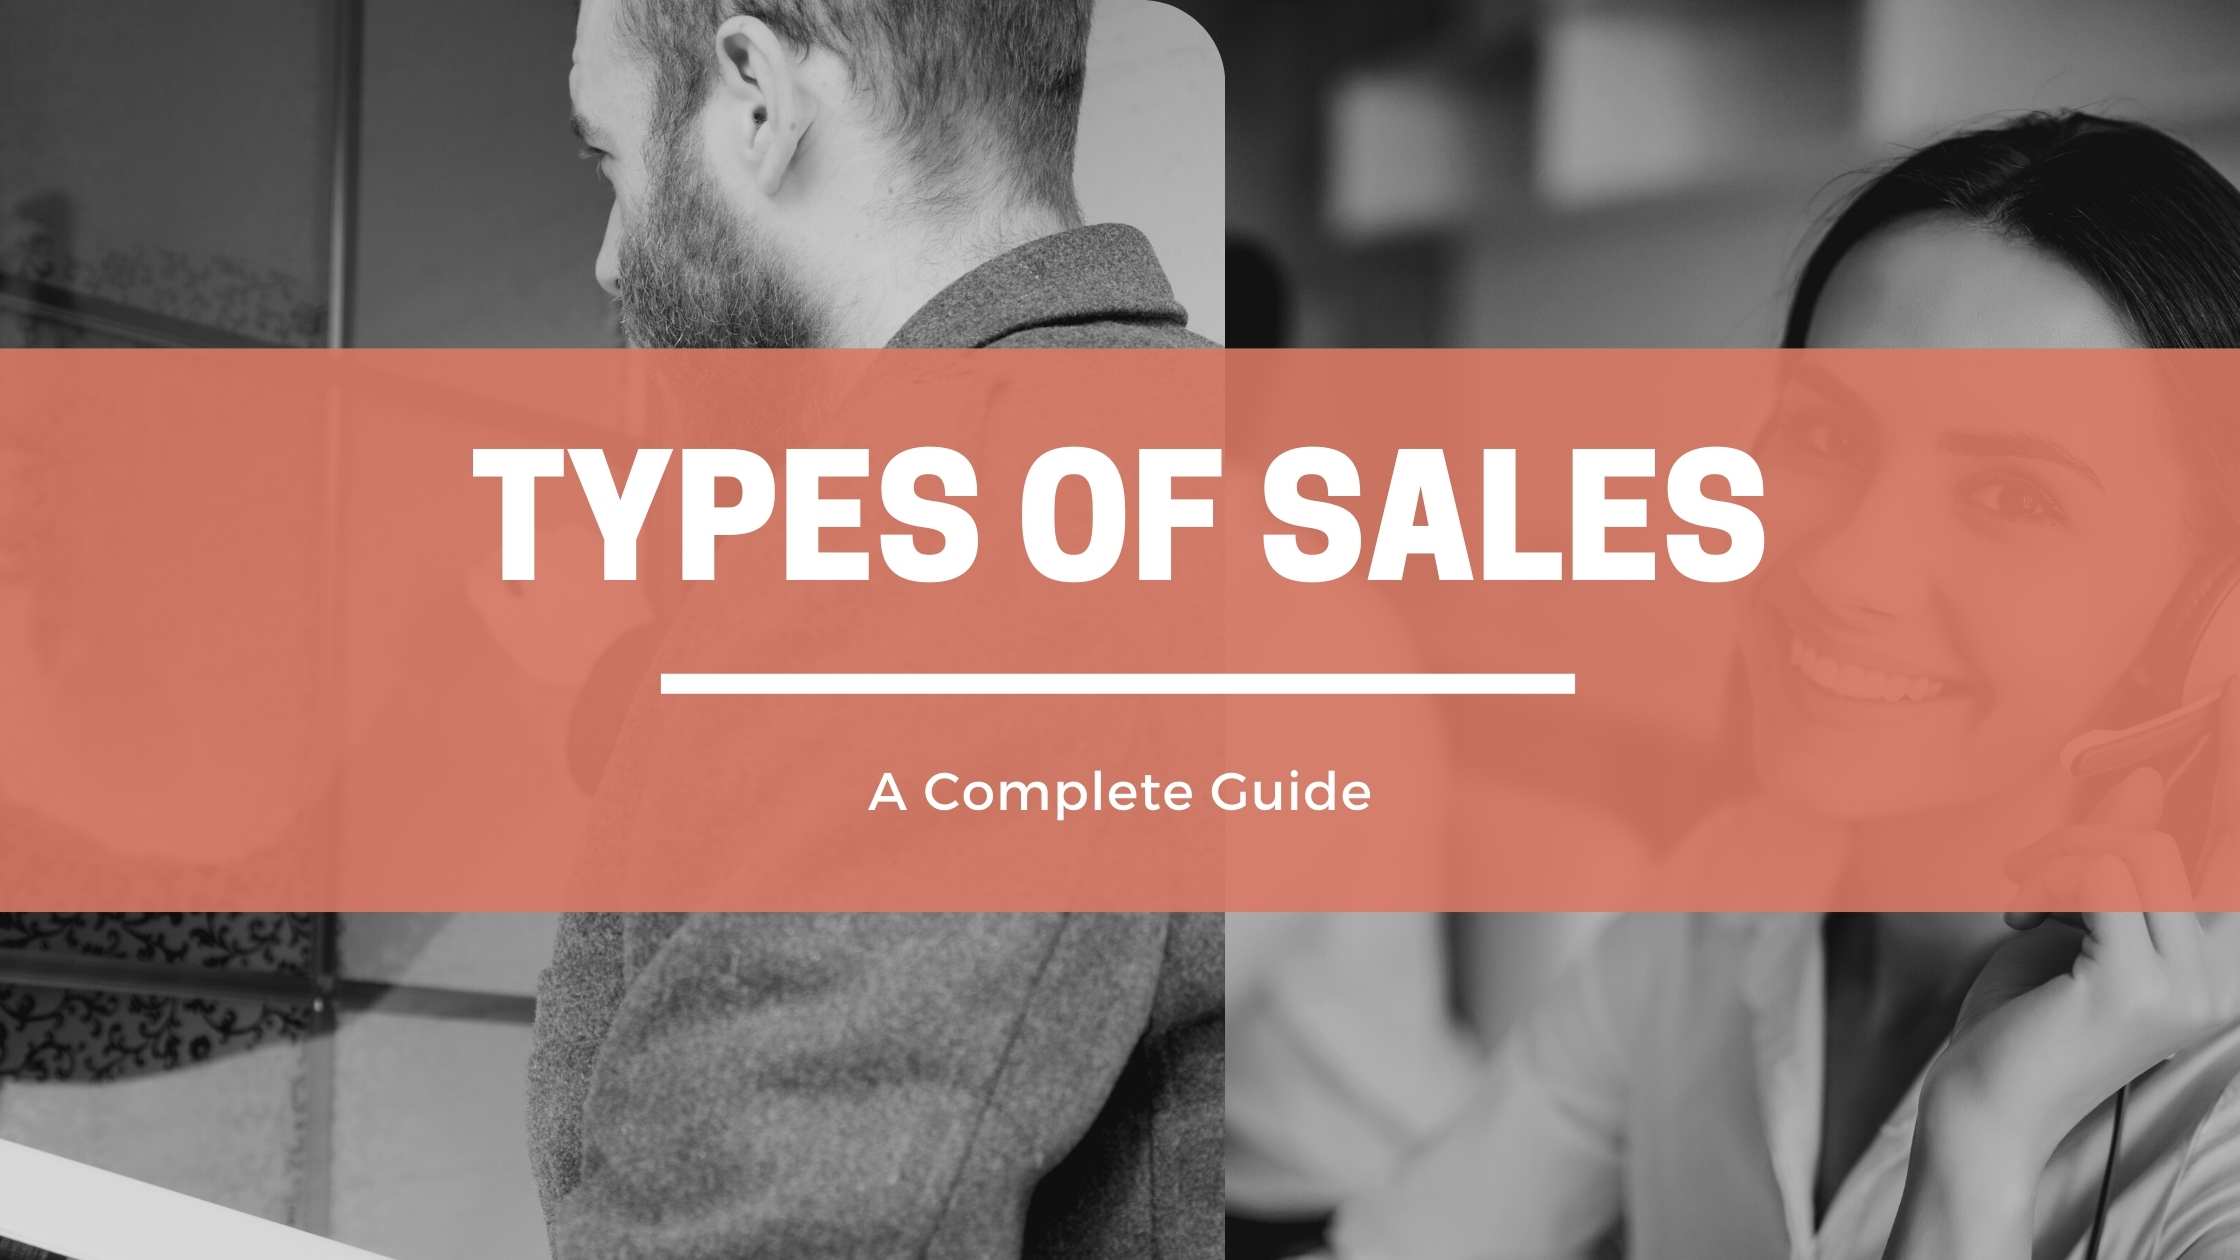 Types of sales with an inside and outside sales rep.